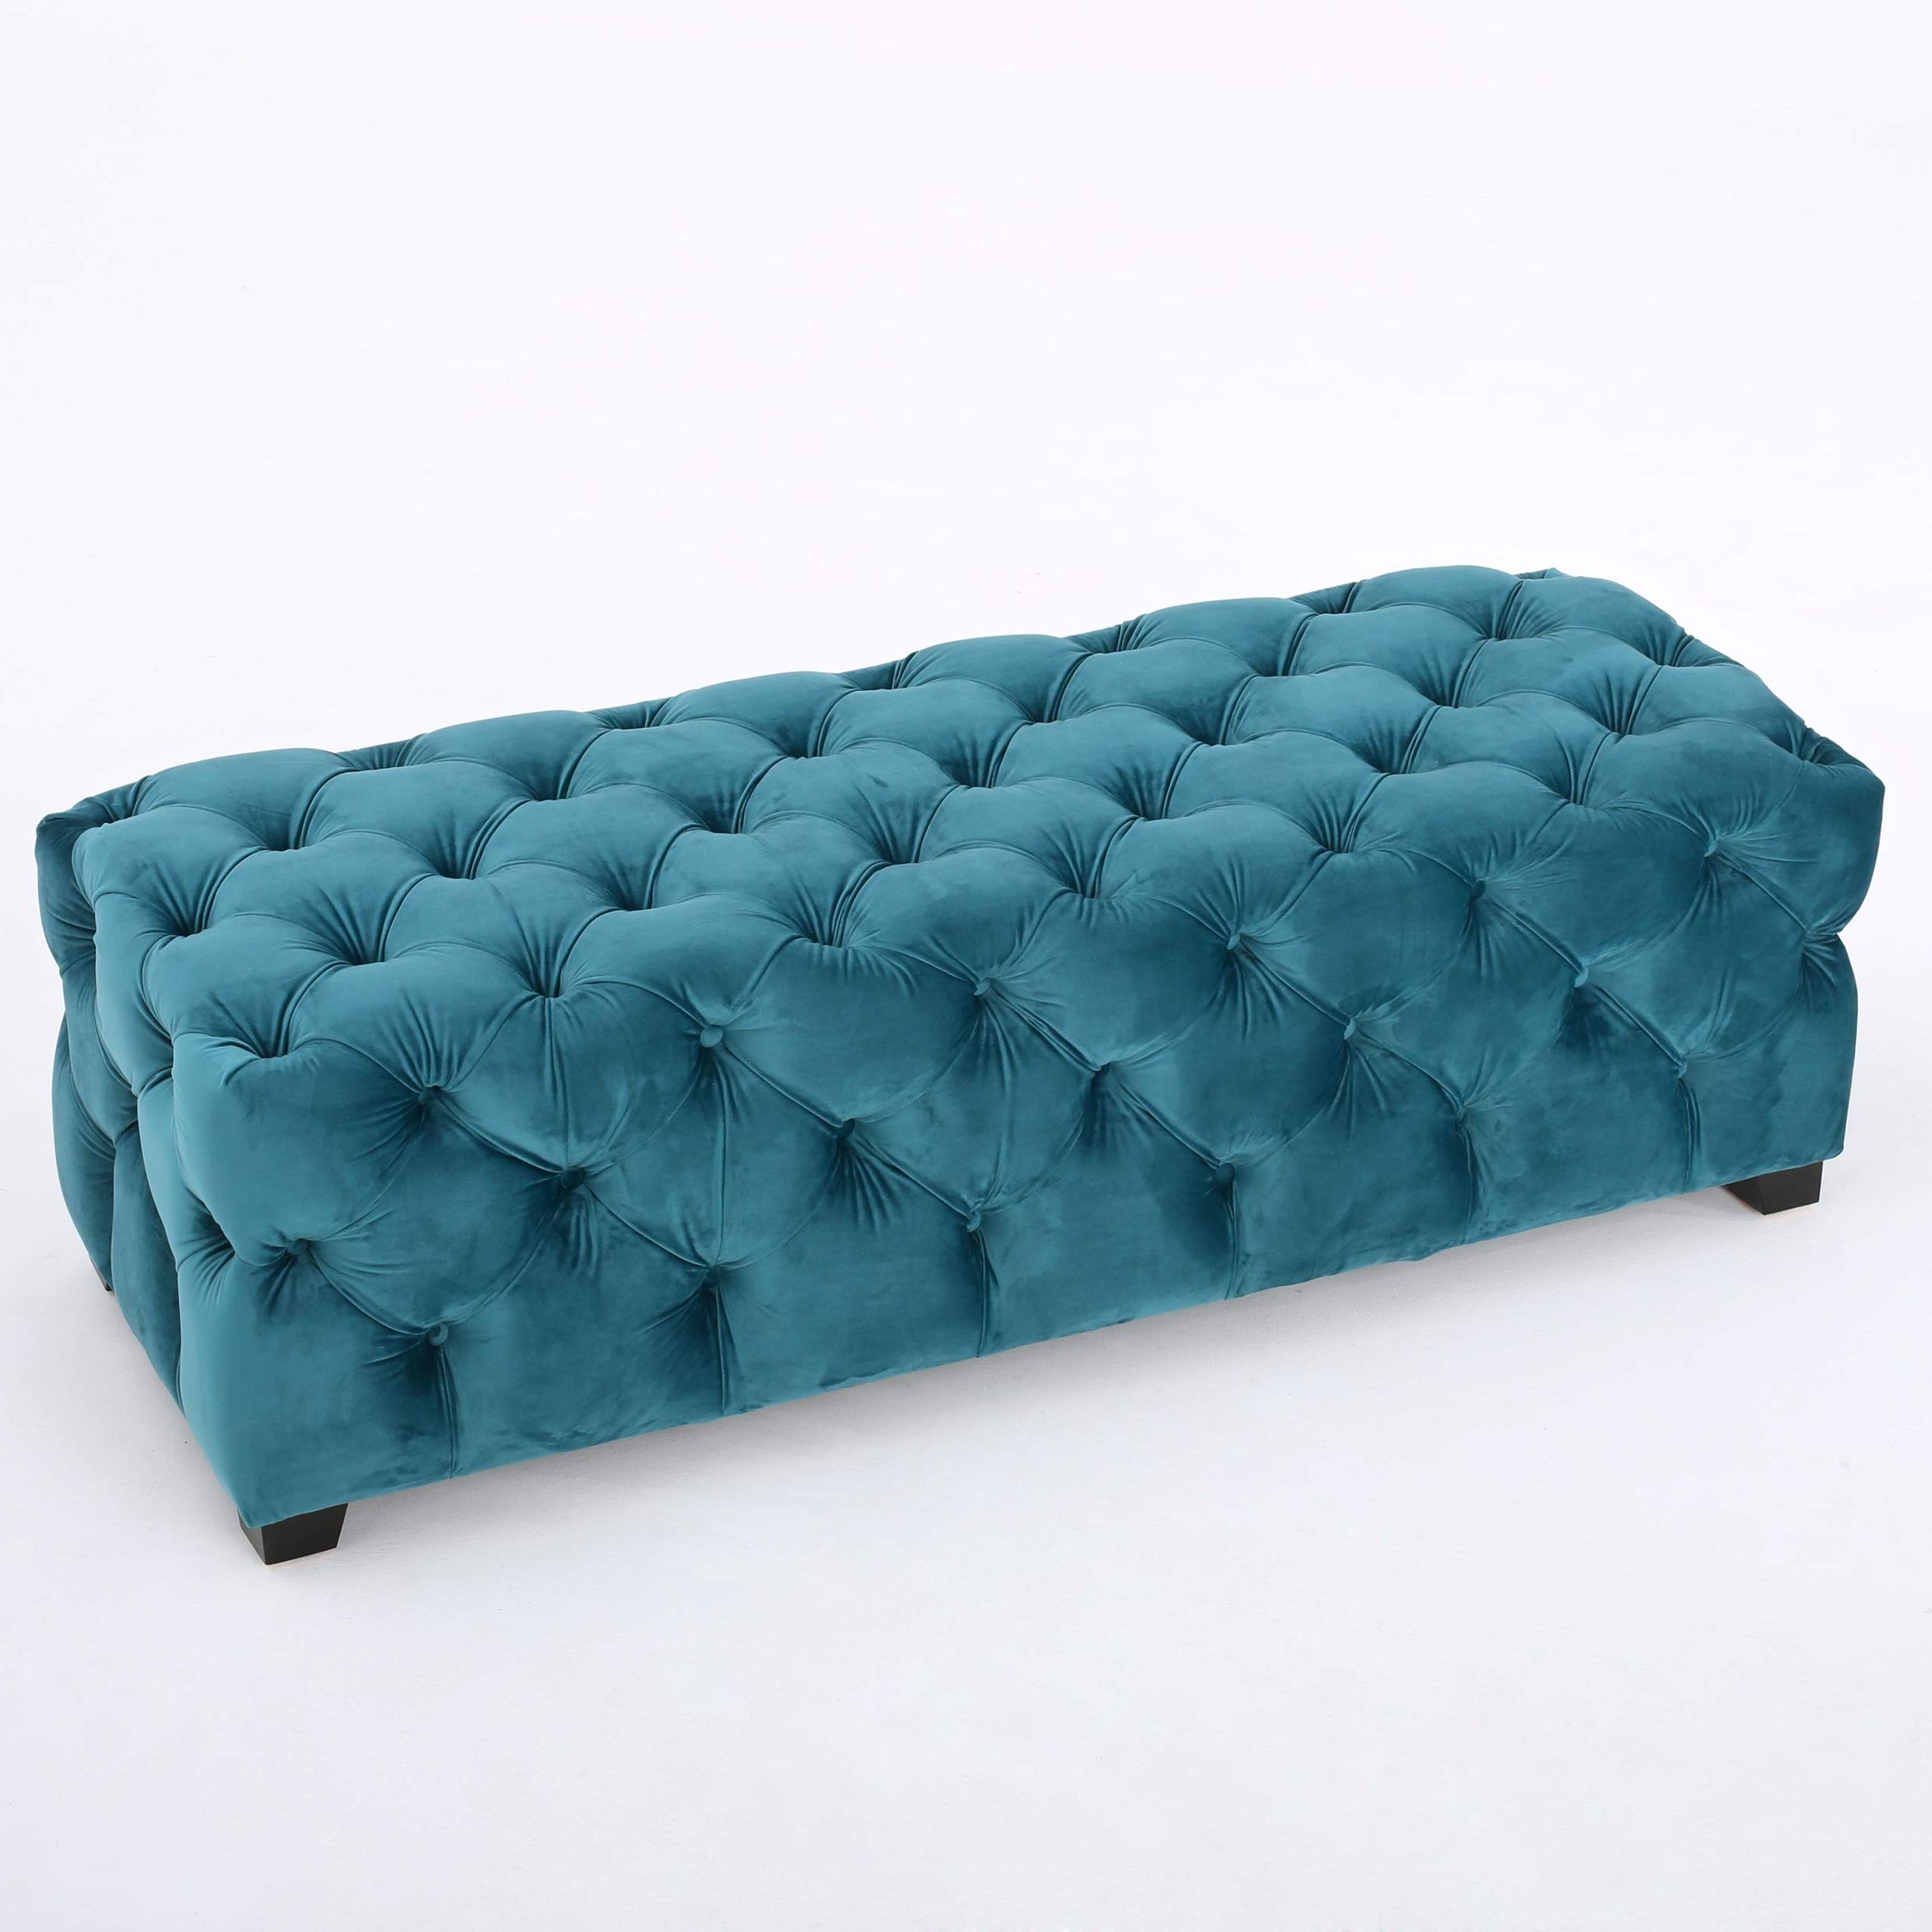 Provence Dark Teal Tufted Velvet Fabric Rectangle Ottoman Bench Best Intended For Preferred Snow Tufted Fabric Ottomans (View 7 of 10)